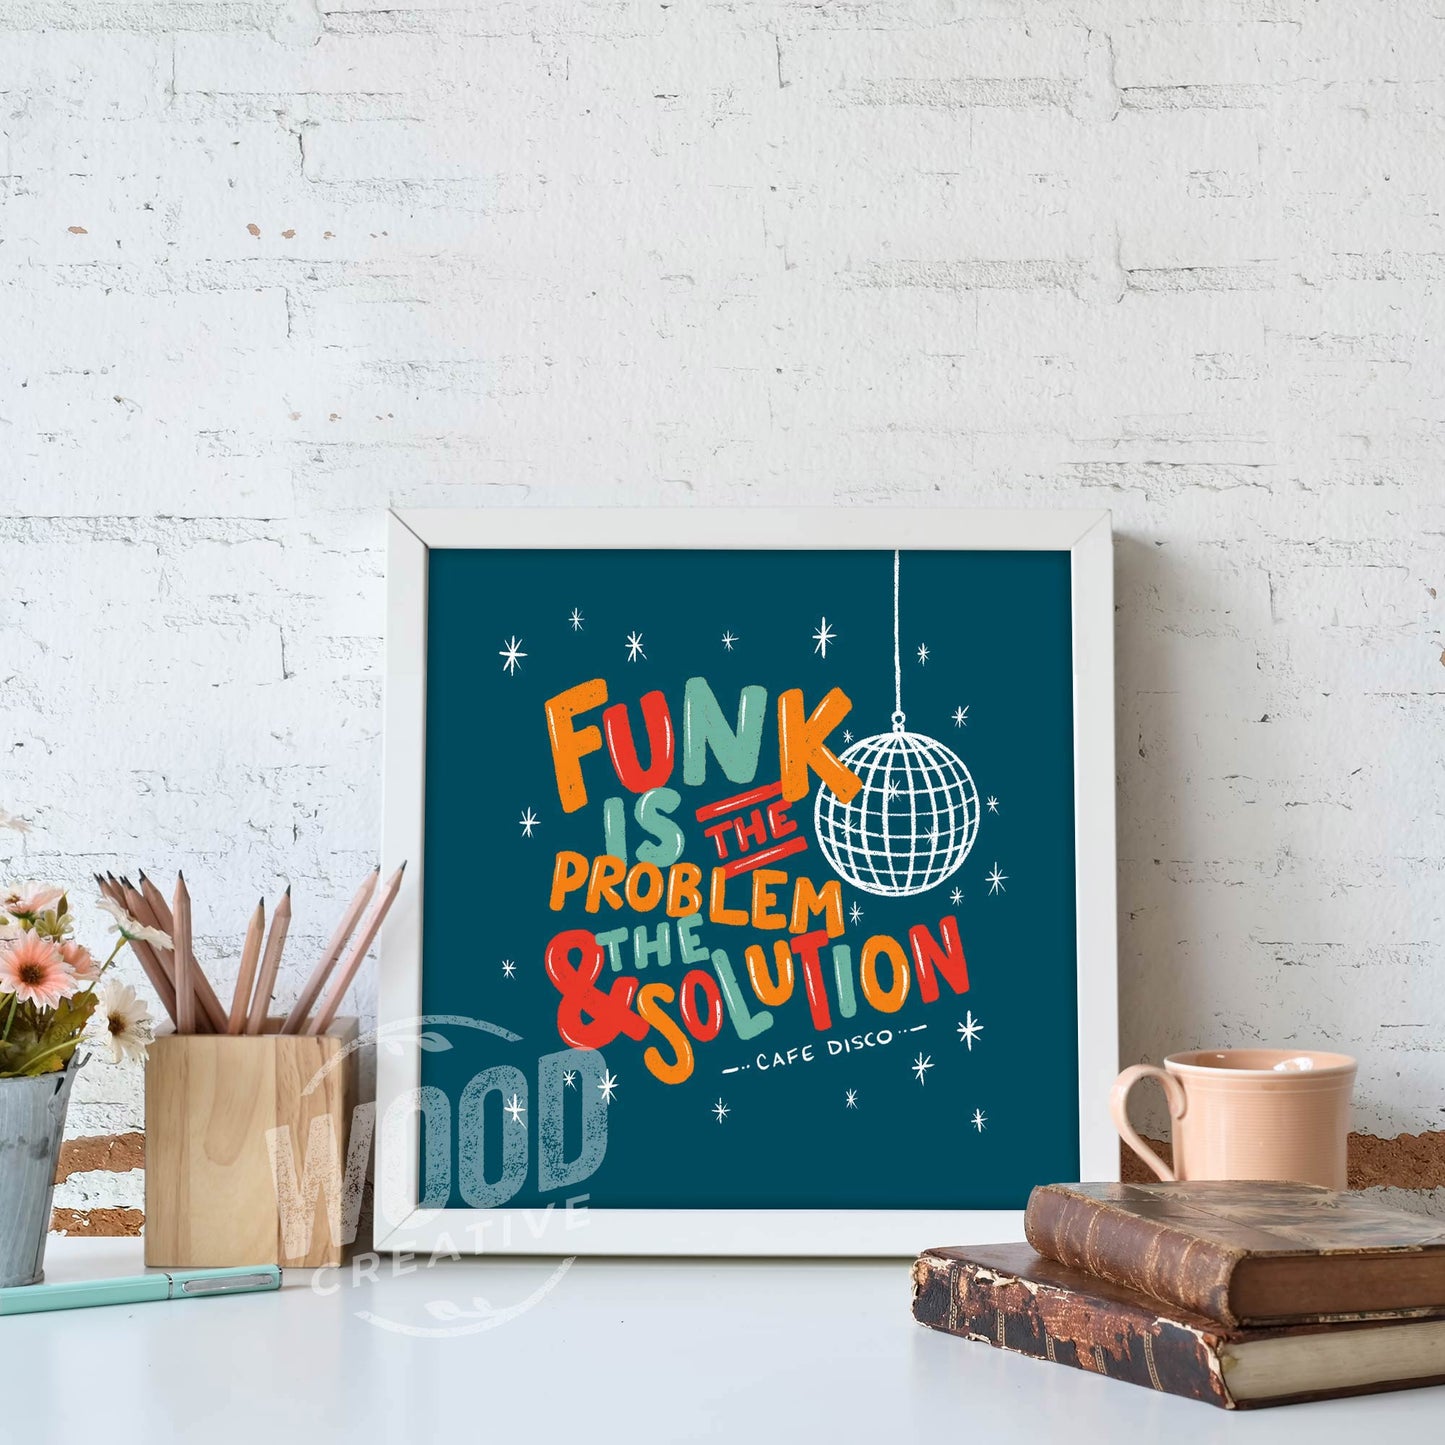 Funk Is The Problem & The Solution 8x8 Art Print